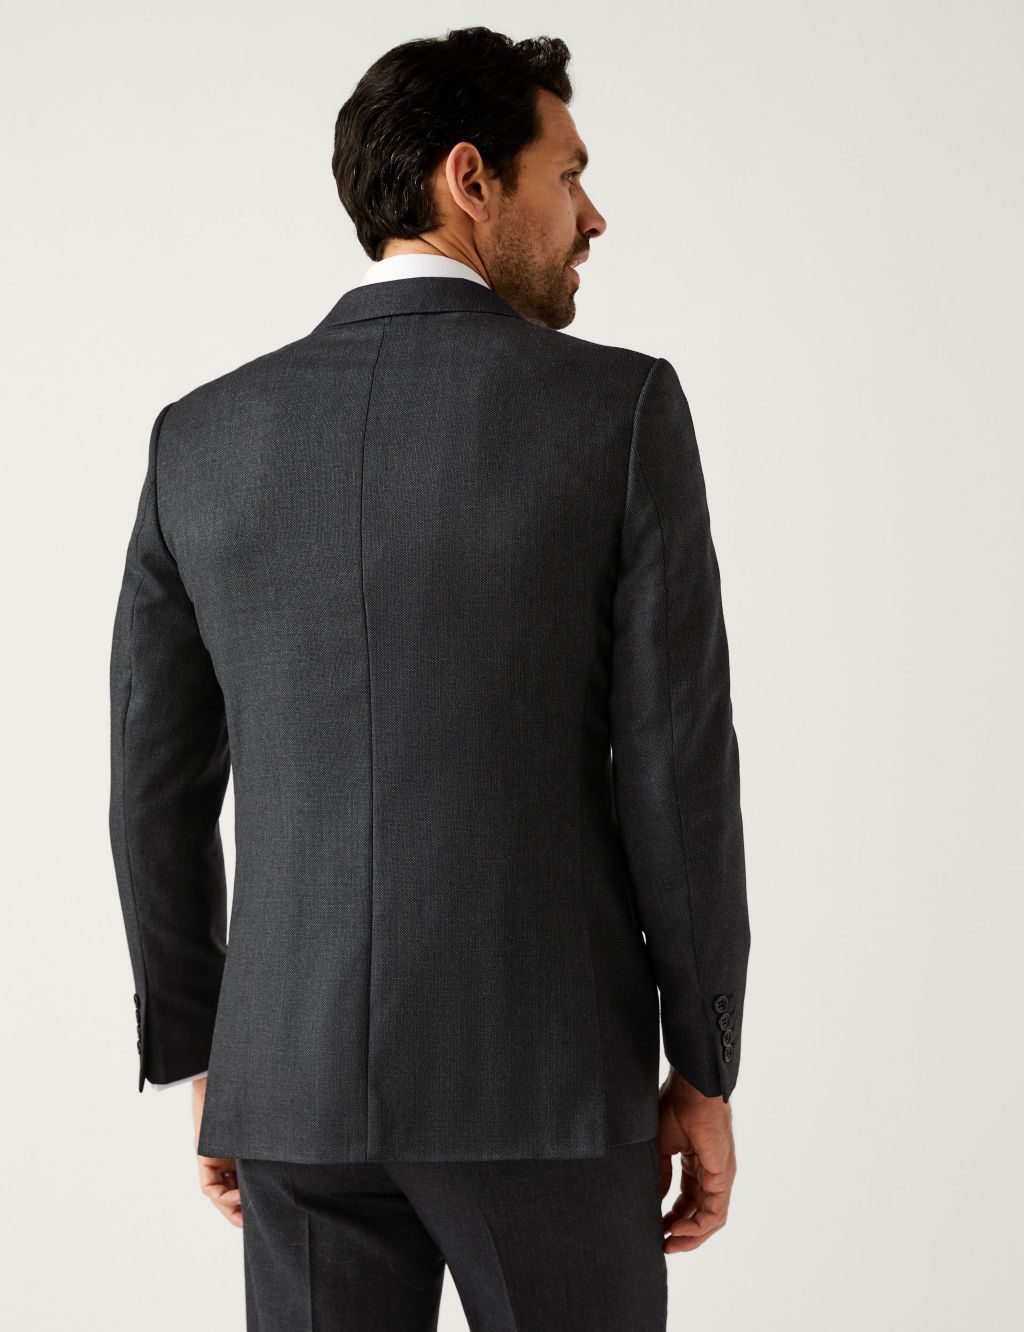 Regular Fit Birdseye Double Breasted Suit image 3